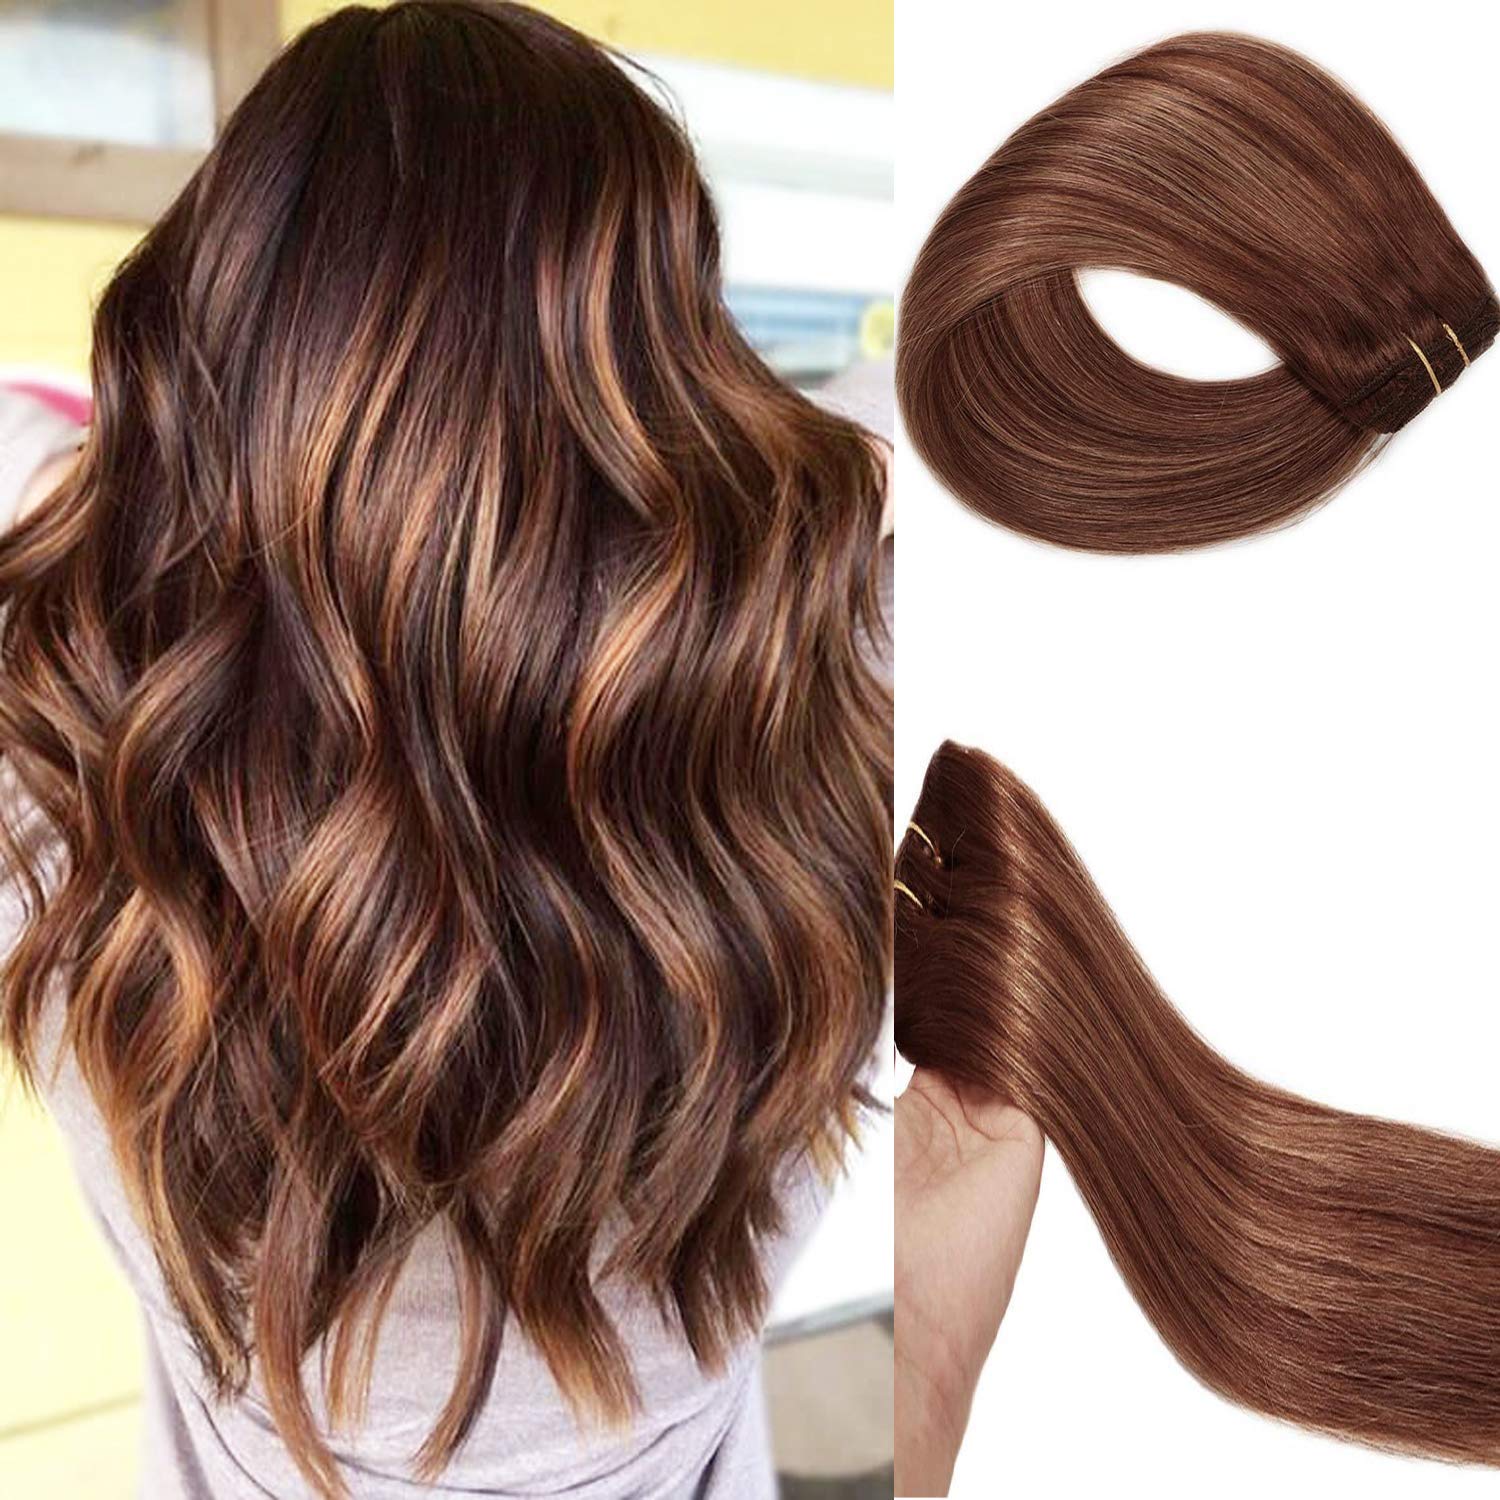 Best clip in hair extensions for thin hair 